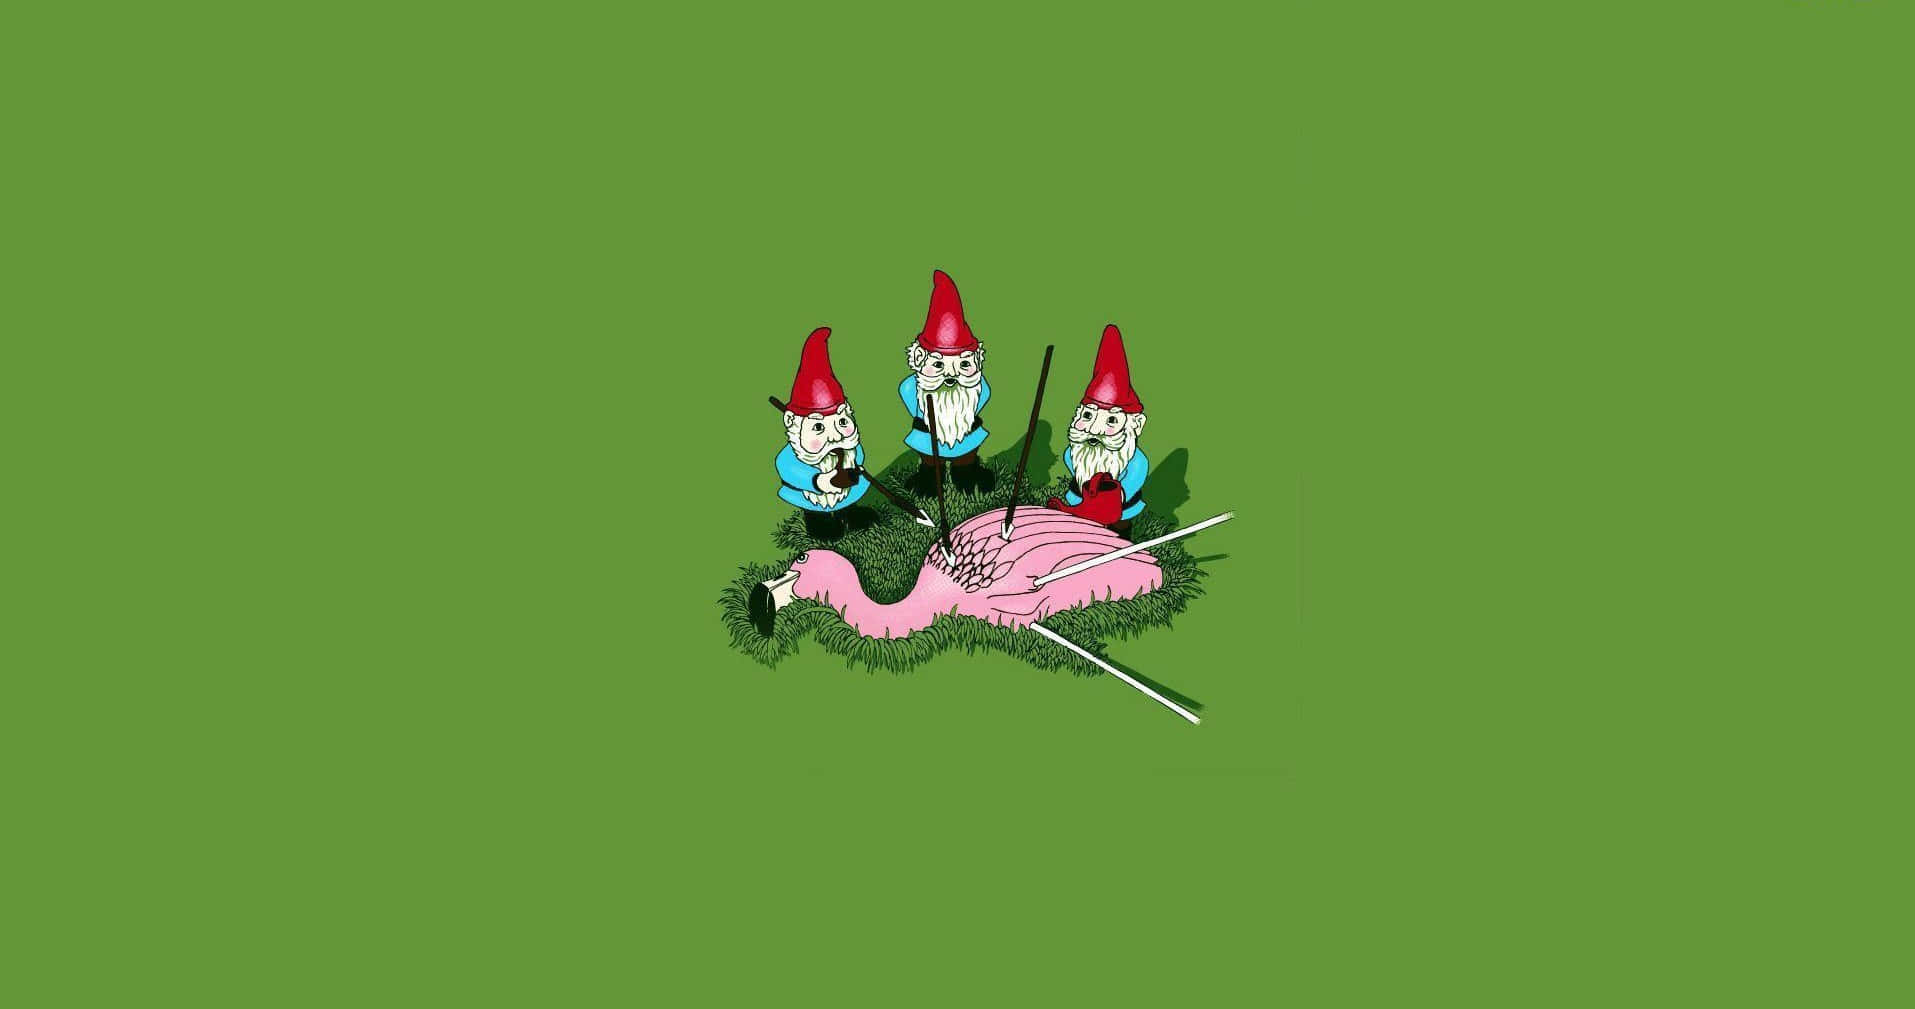 Delightful Gathering of Gnomes Under a Tree